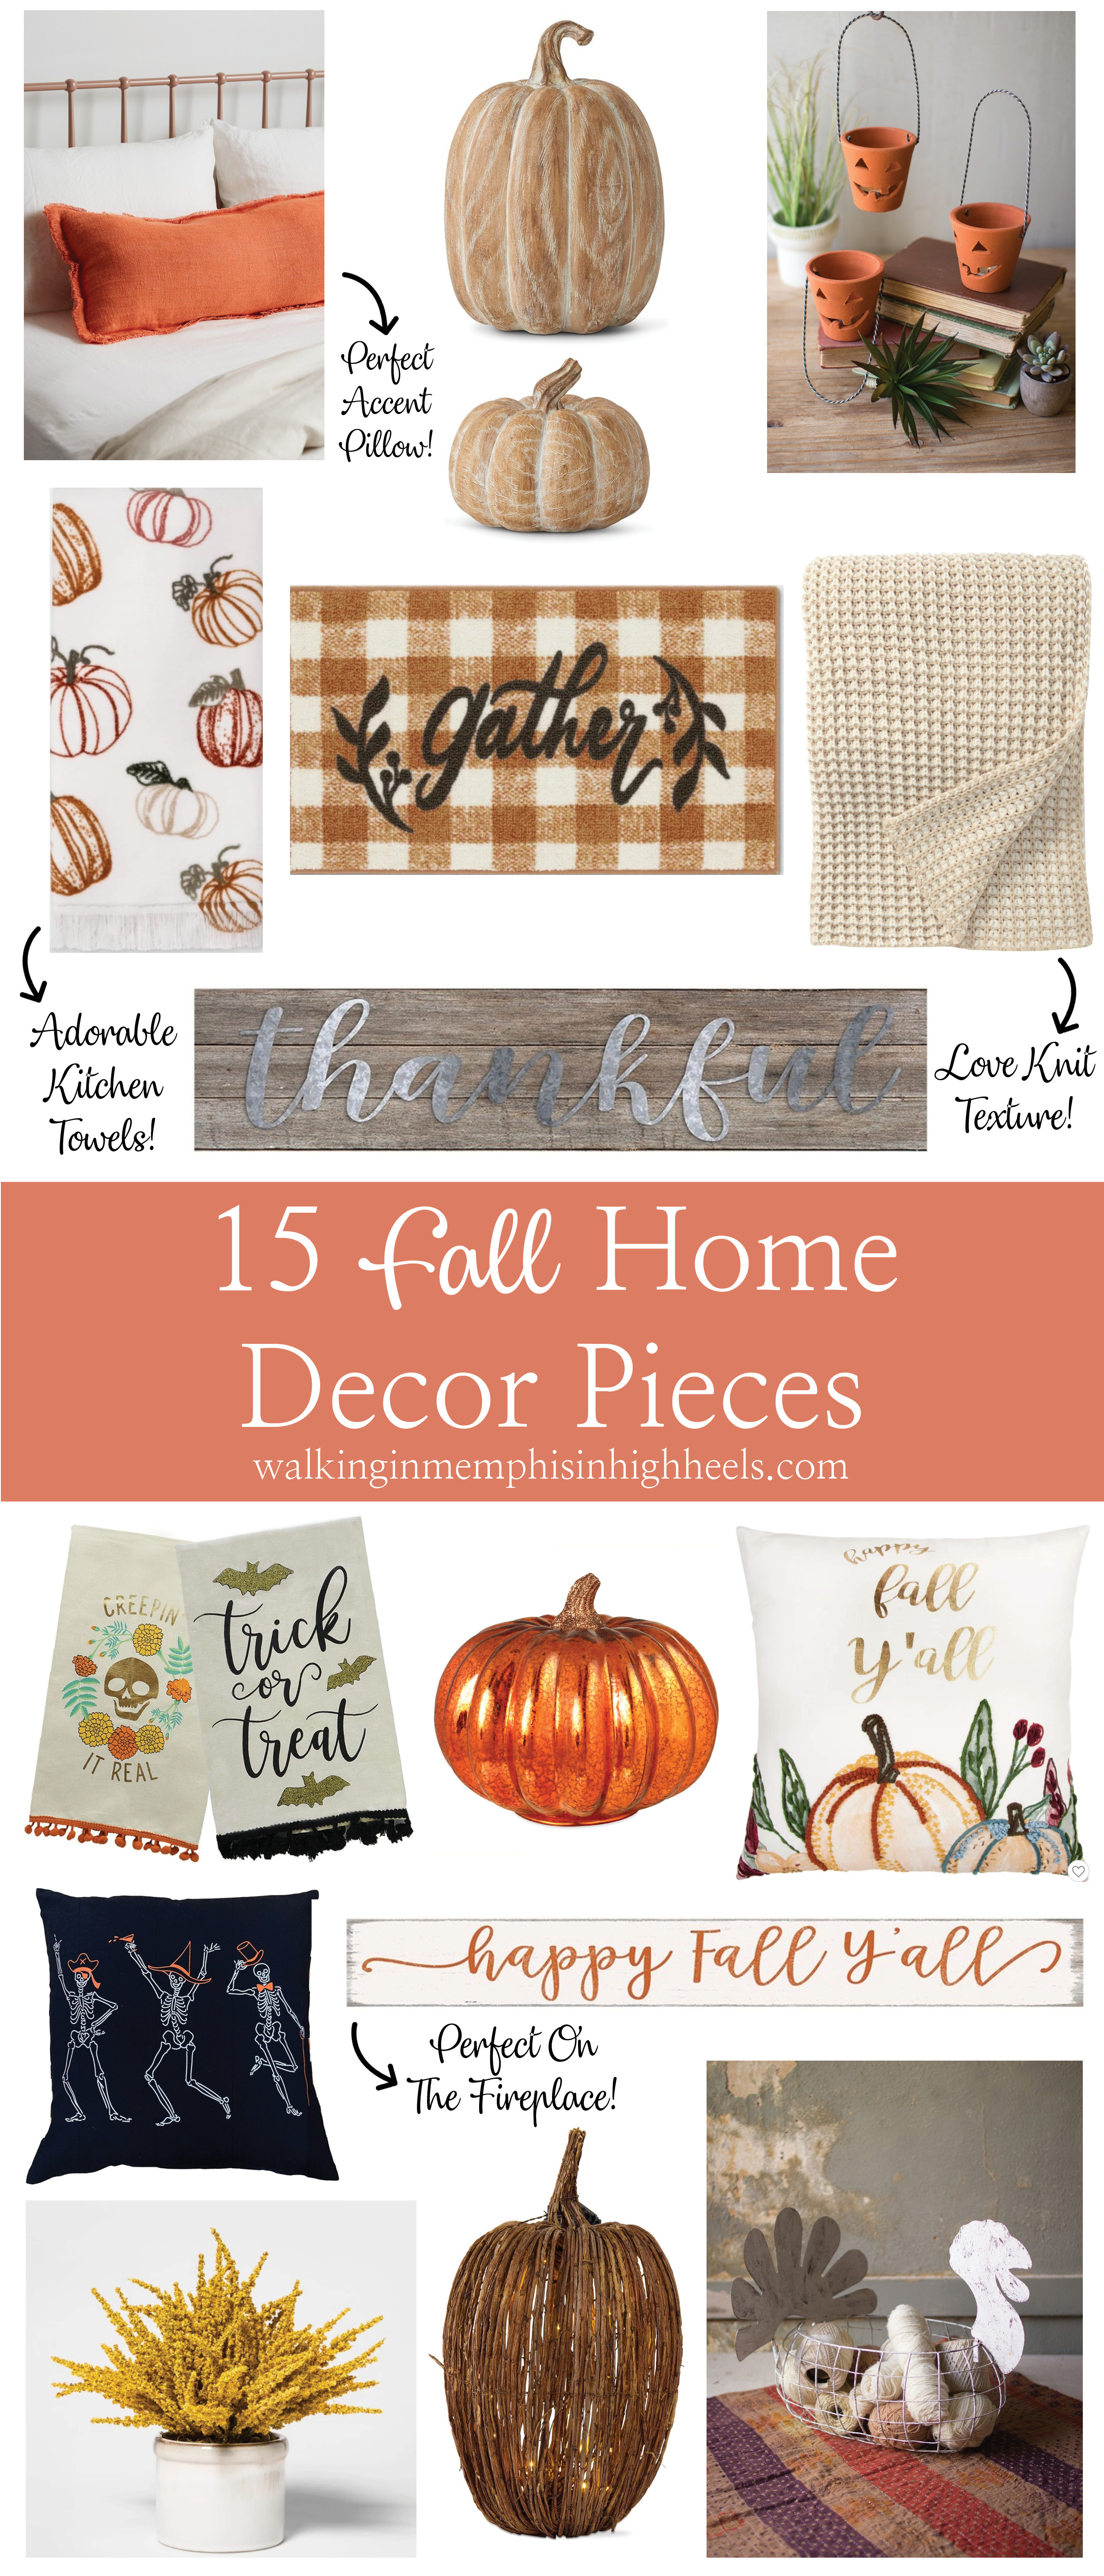 15 Fall Home Decor Ideas To Add Your House by popular Tennessee life and style blog, Walking in Memphis in High Heels: collage image of various fall home decor items.